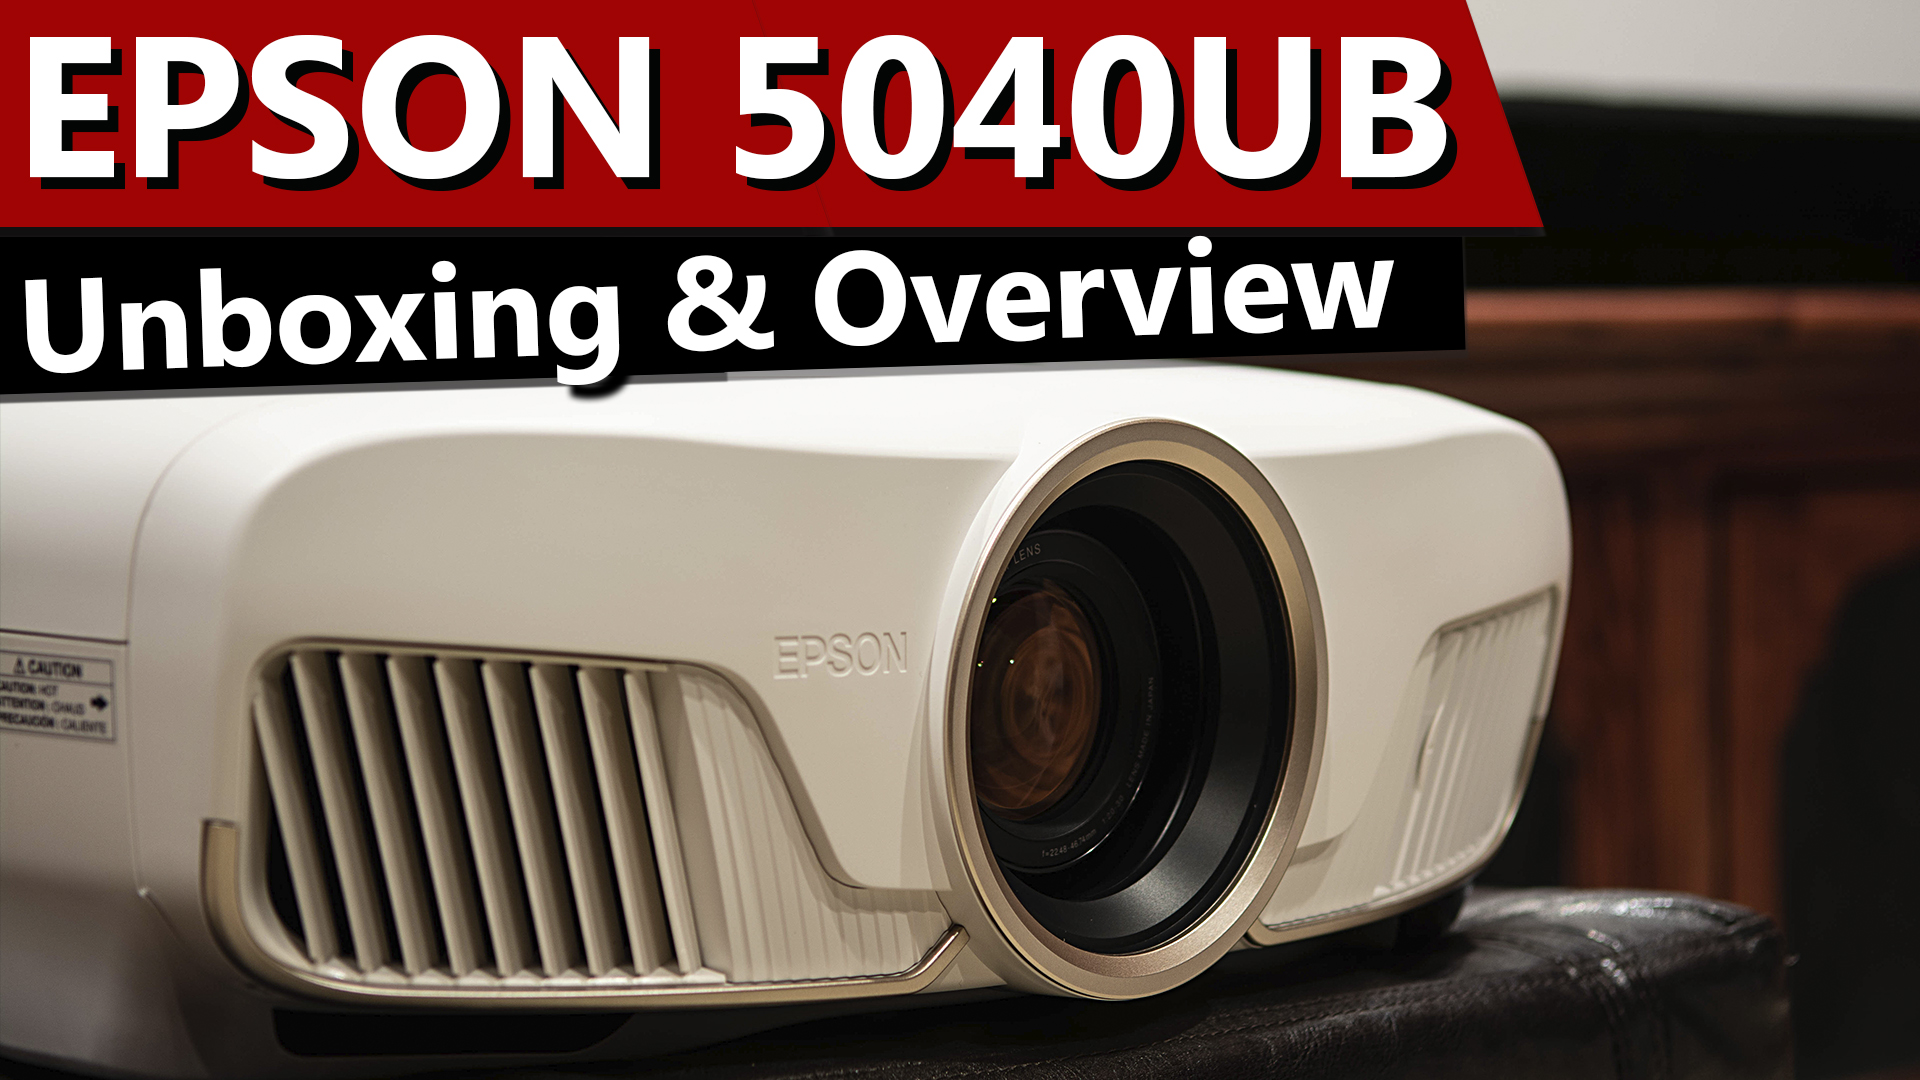 Epson 5040UB - Unboxing and Overview